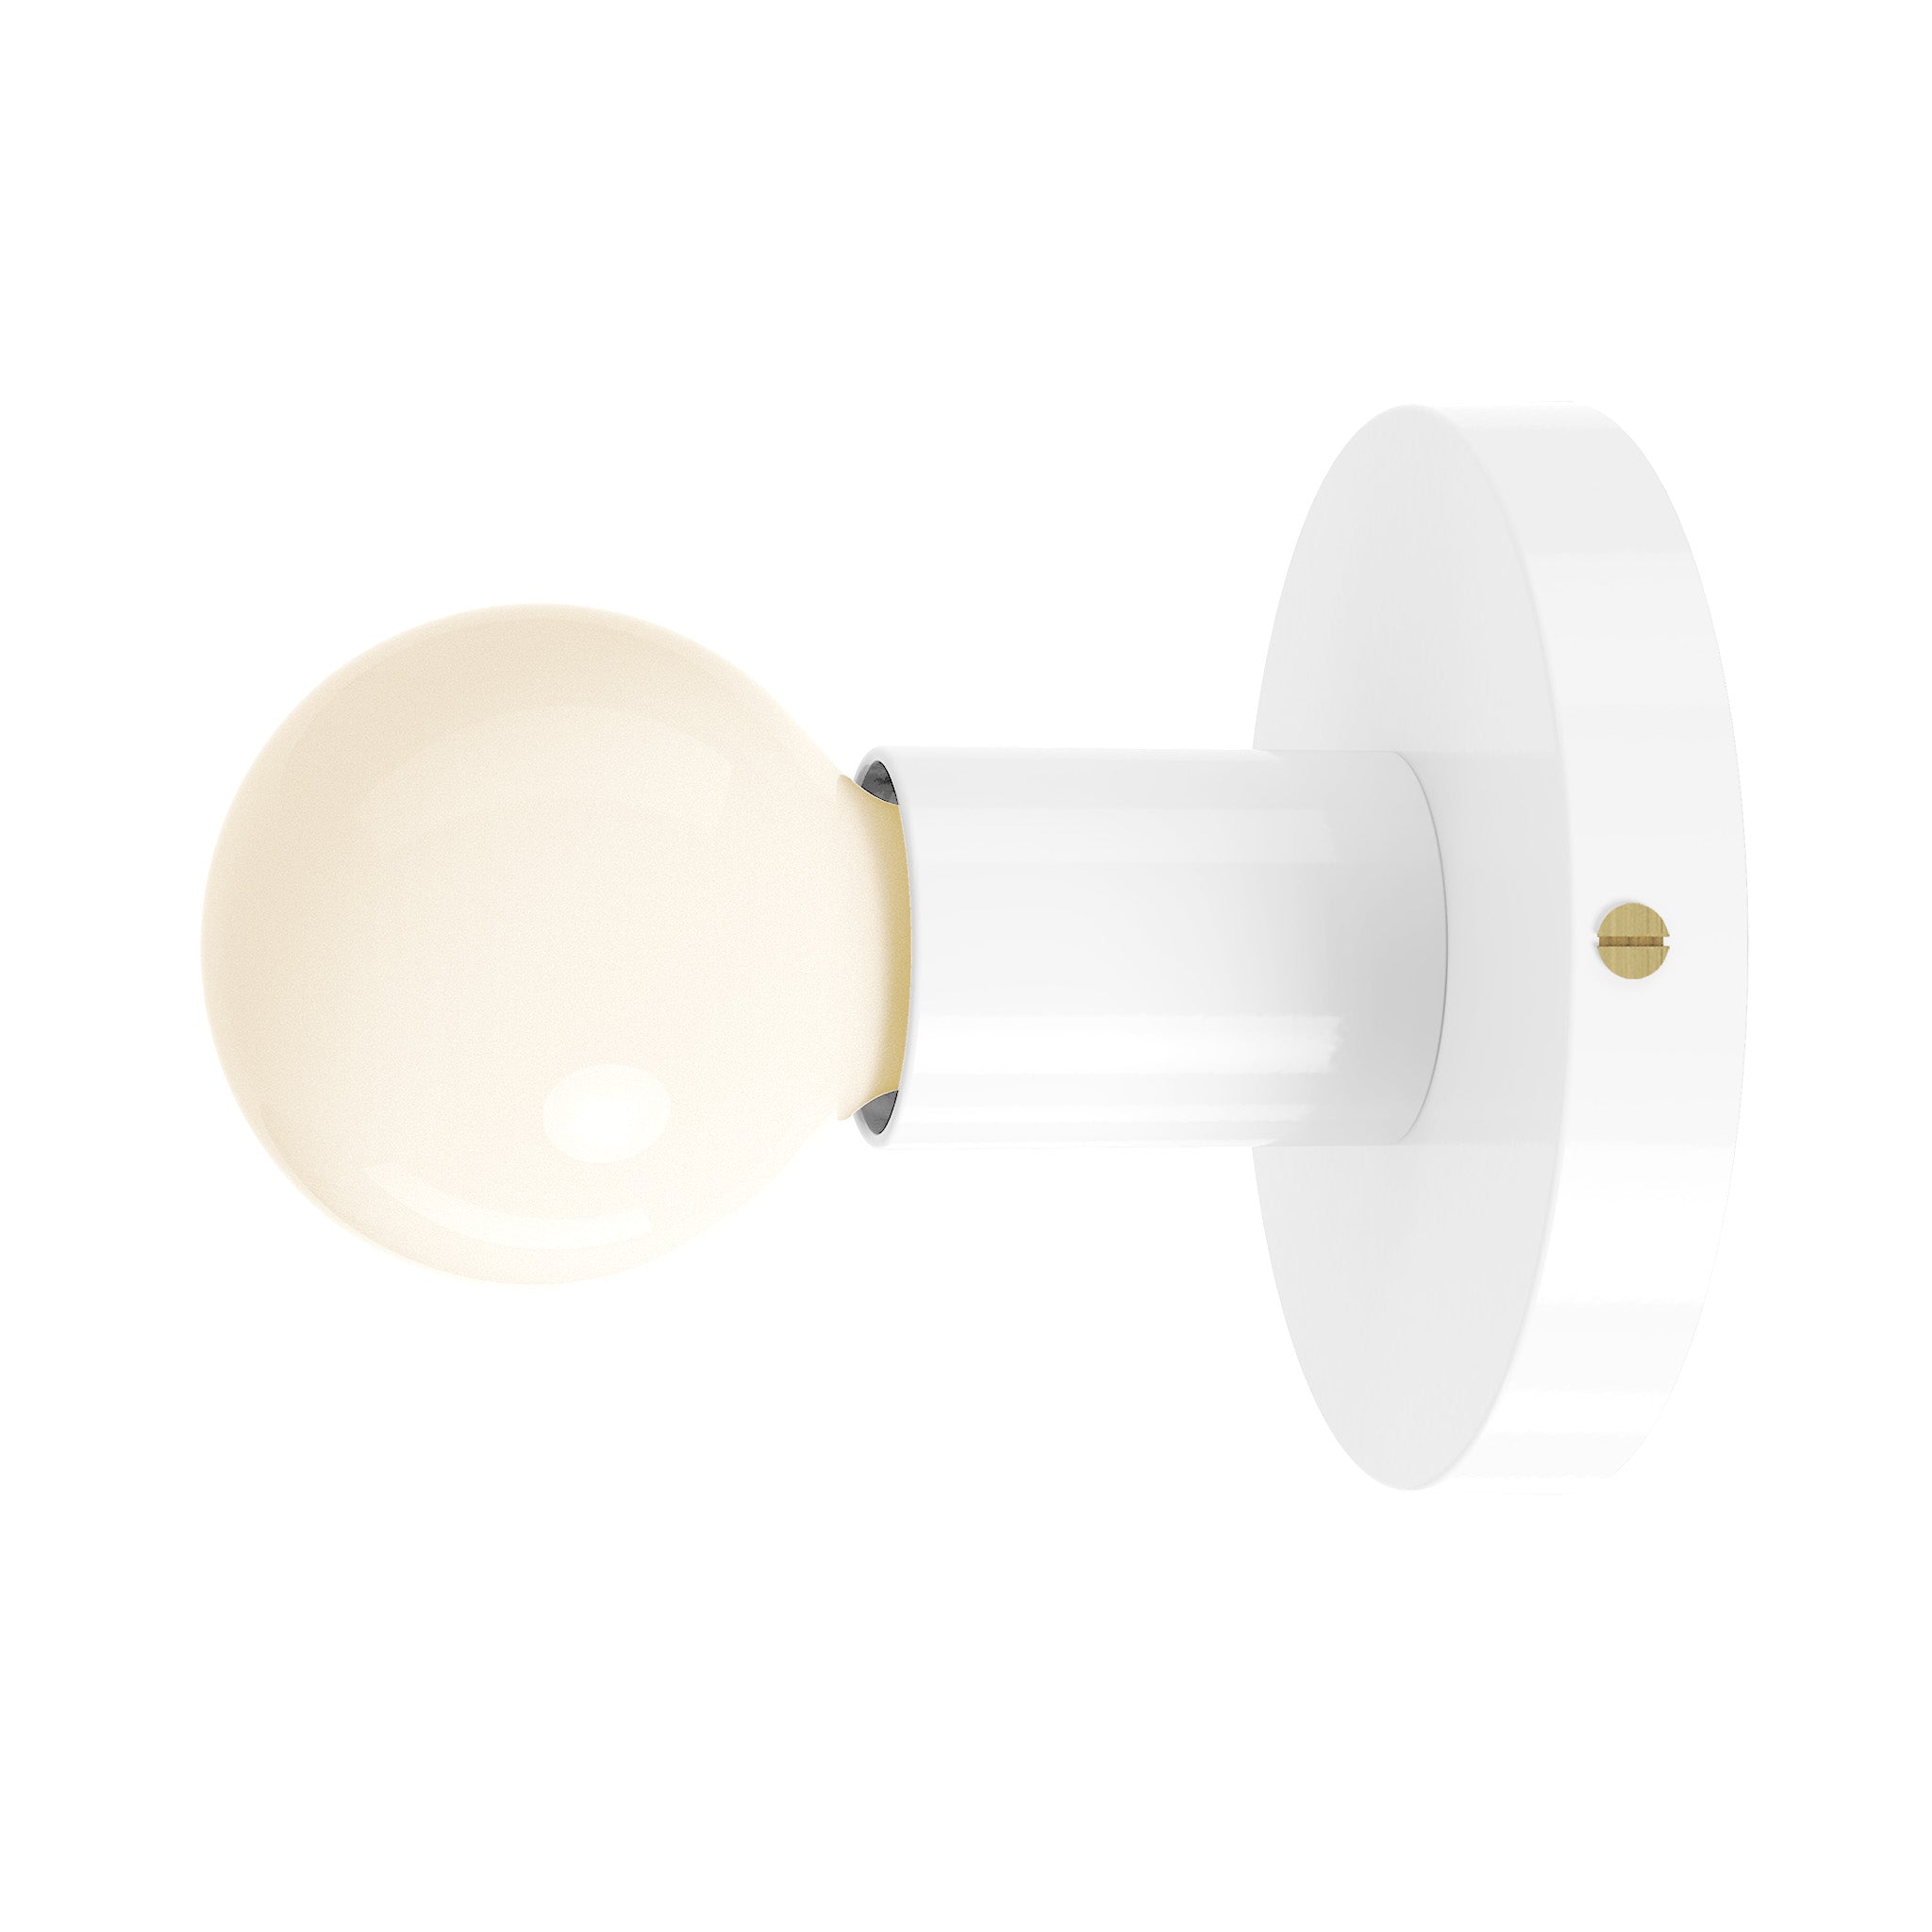 brass white color twink sconce dutton brown lighting